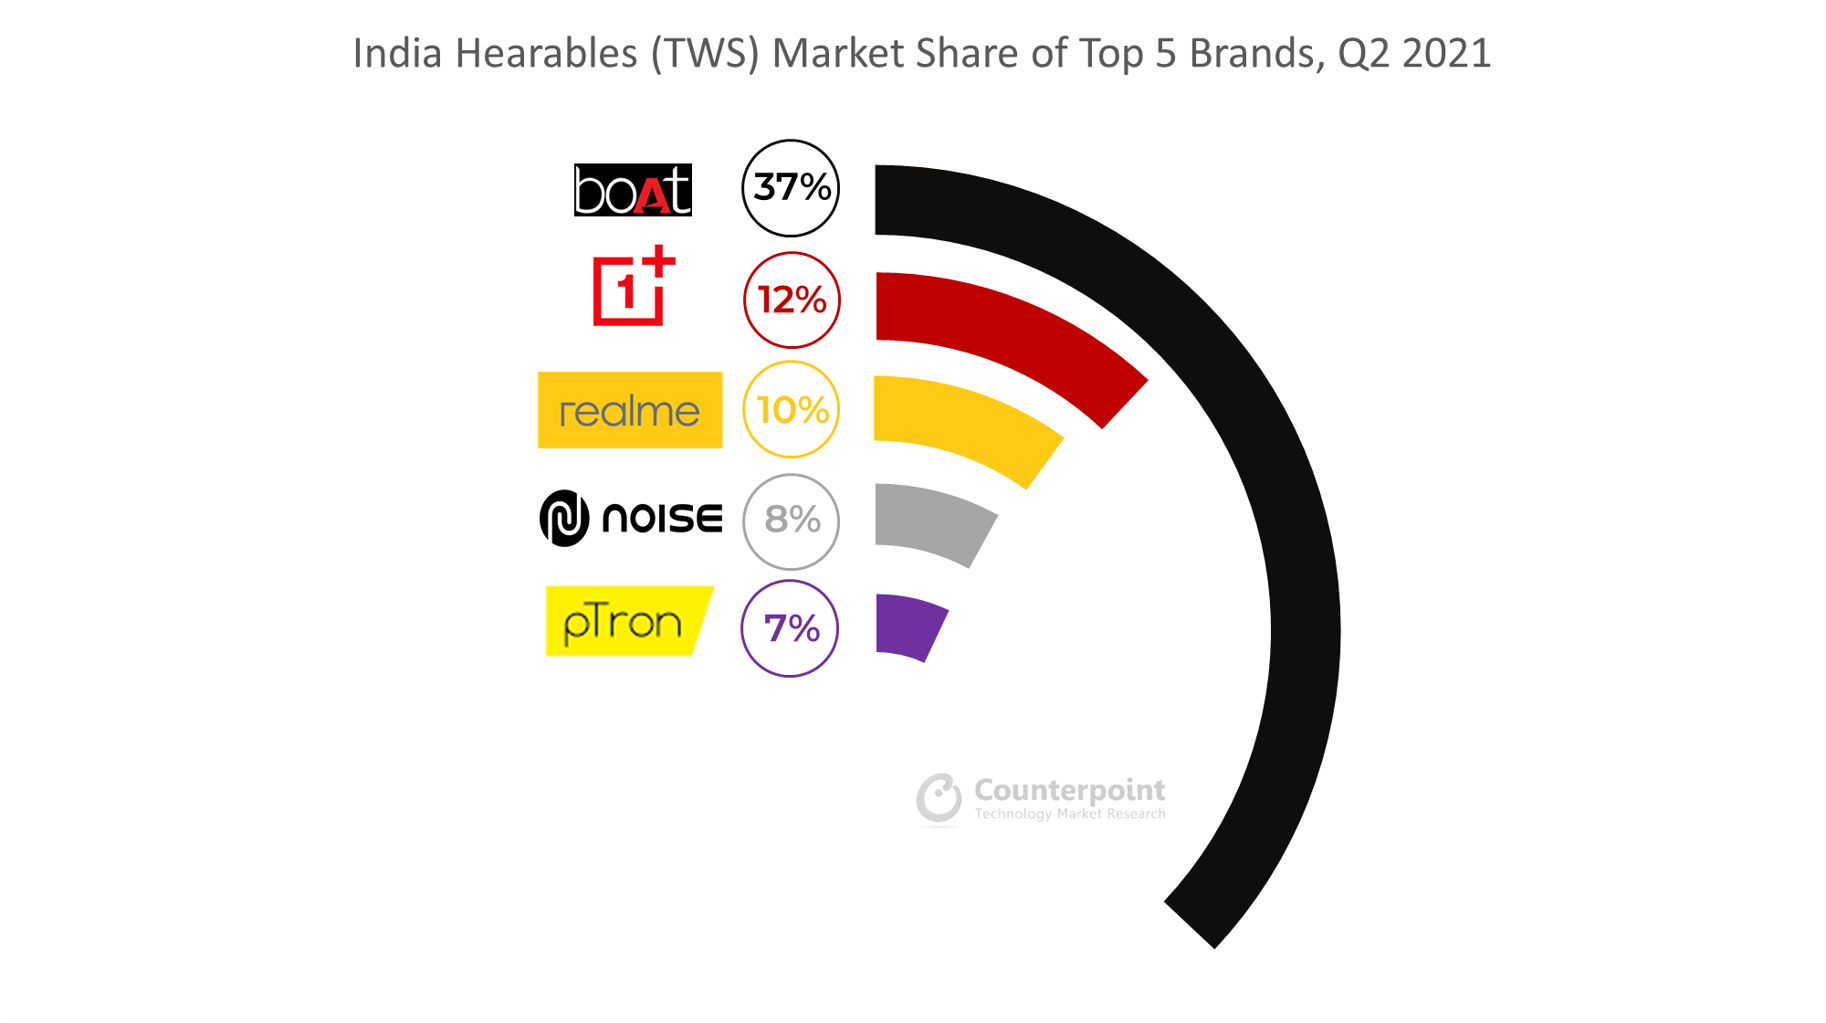 Counterpoint Research - India Hearables (TWS) Market Share of Top 5 Brands, Q2 2021